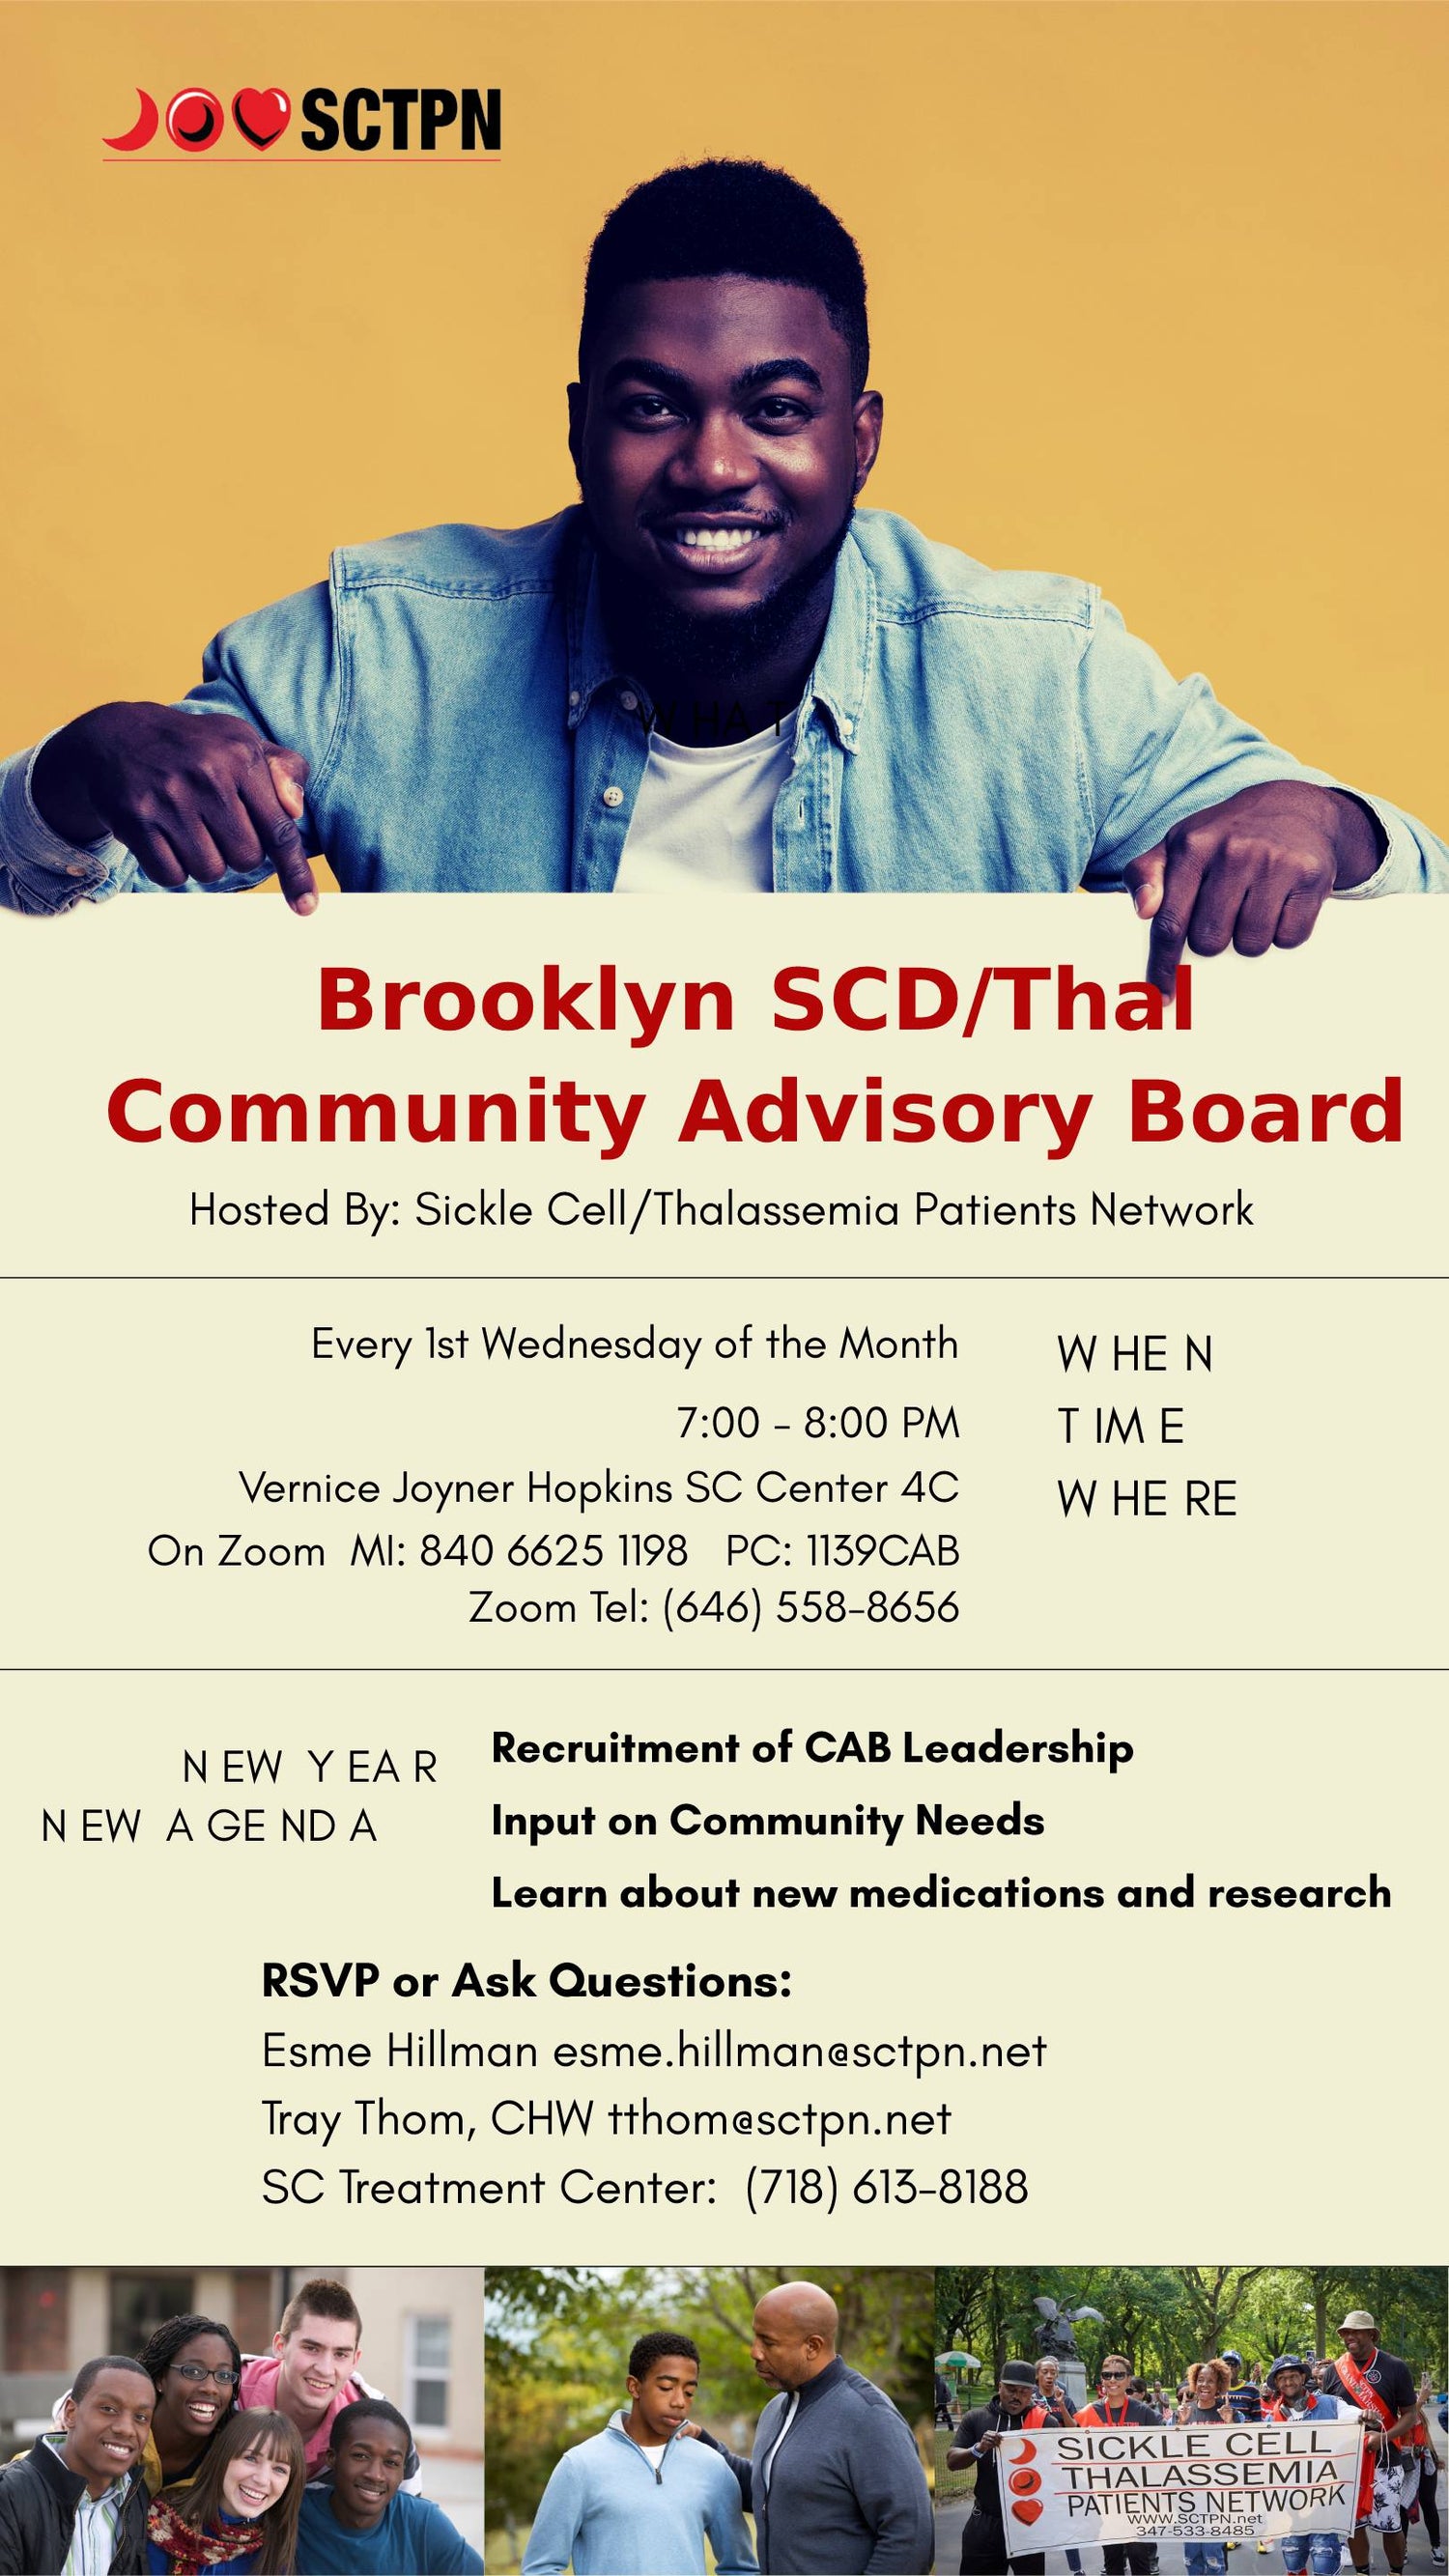 Brooklyn Community Advisory Board (every 1st Wednesday of the month)